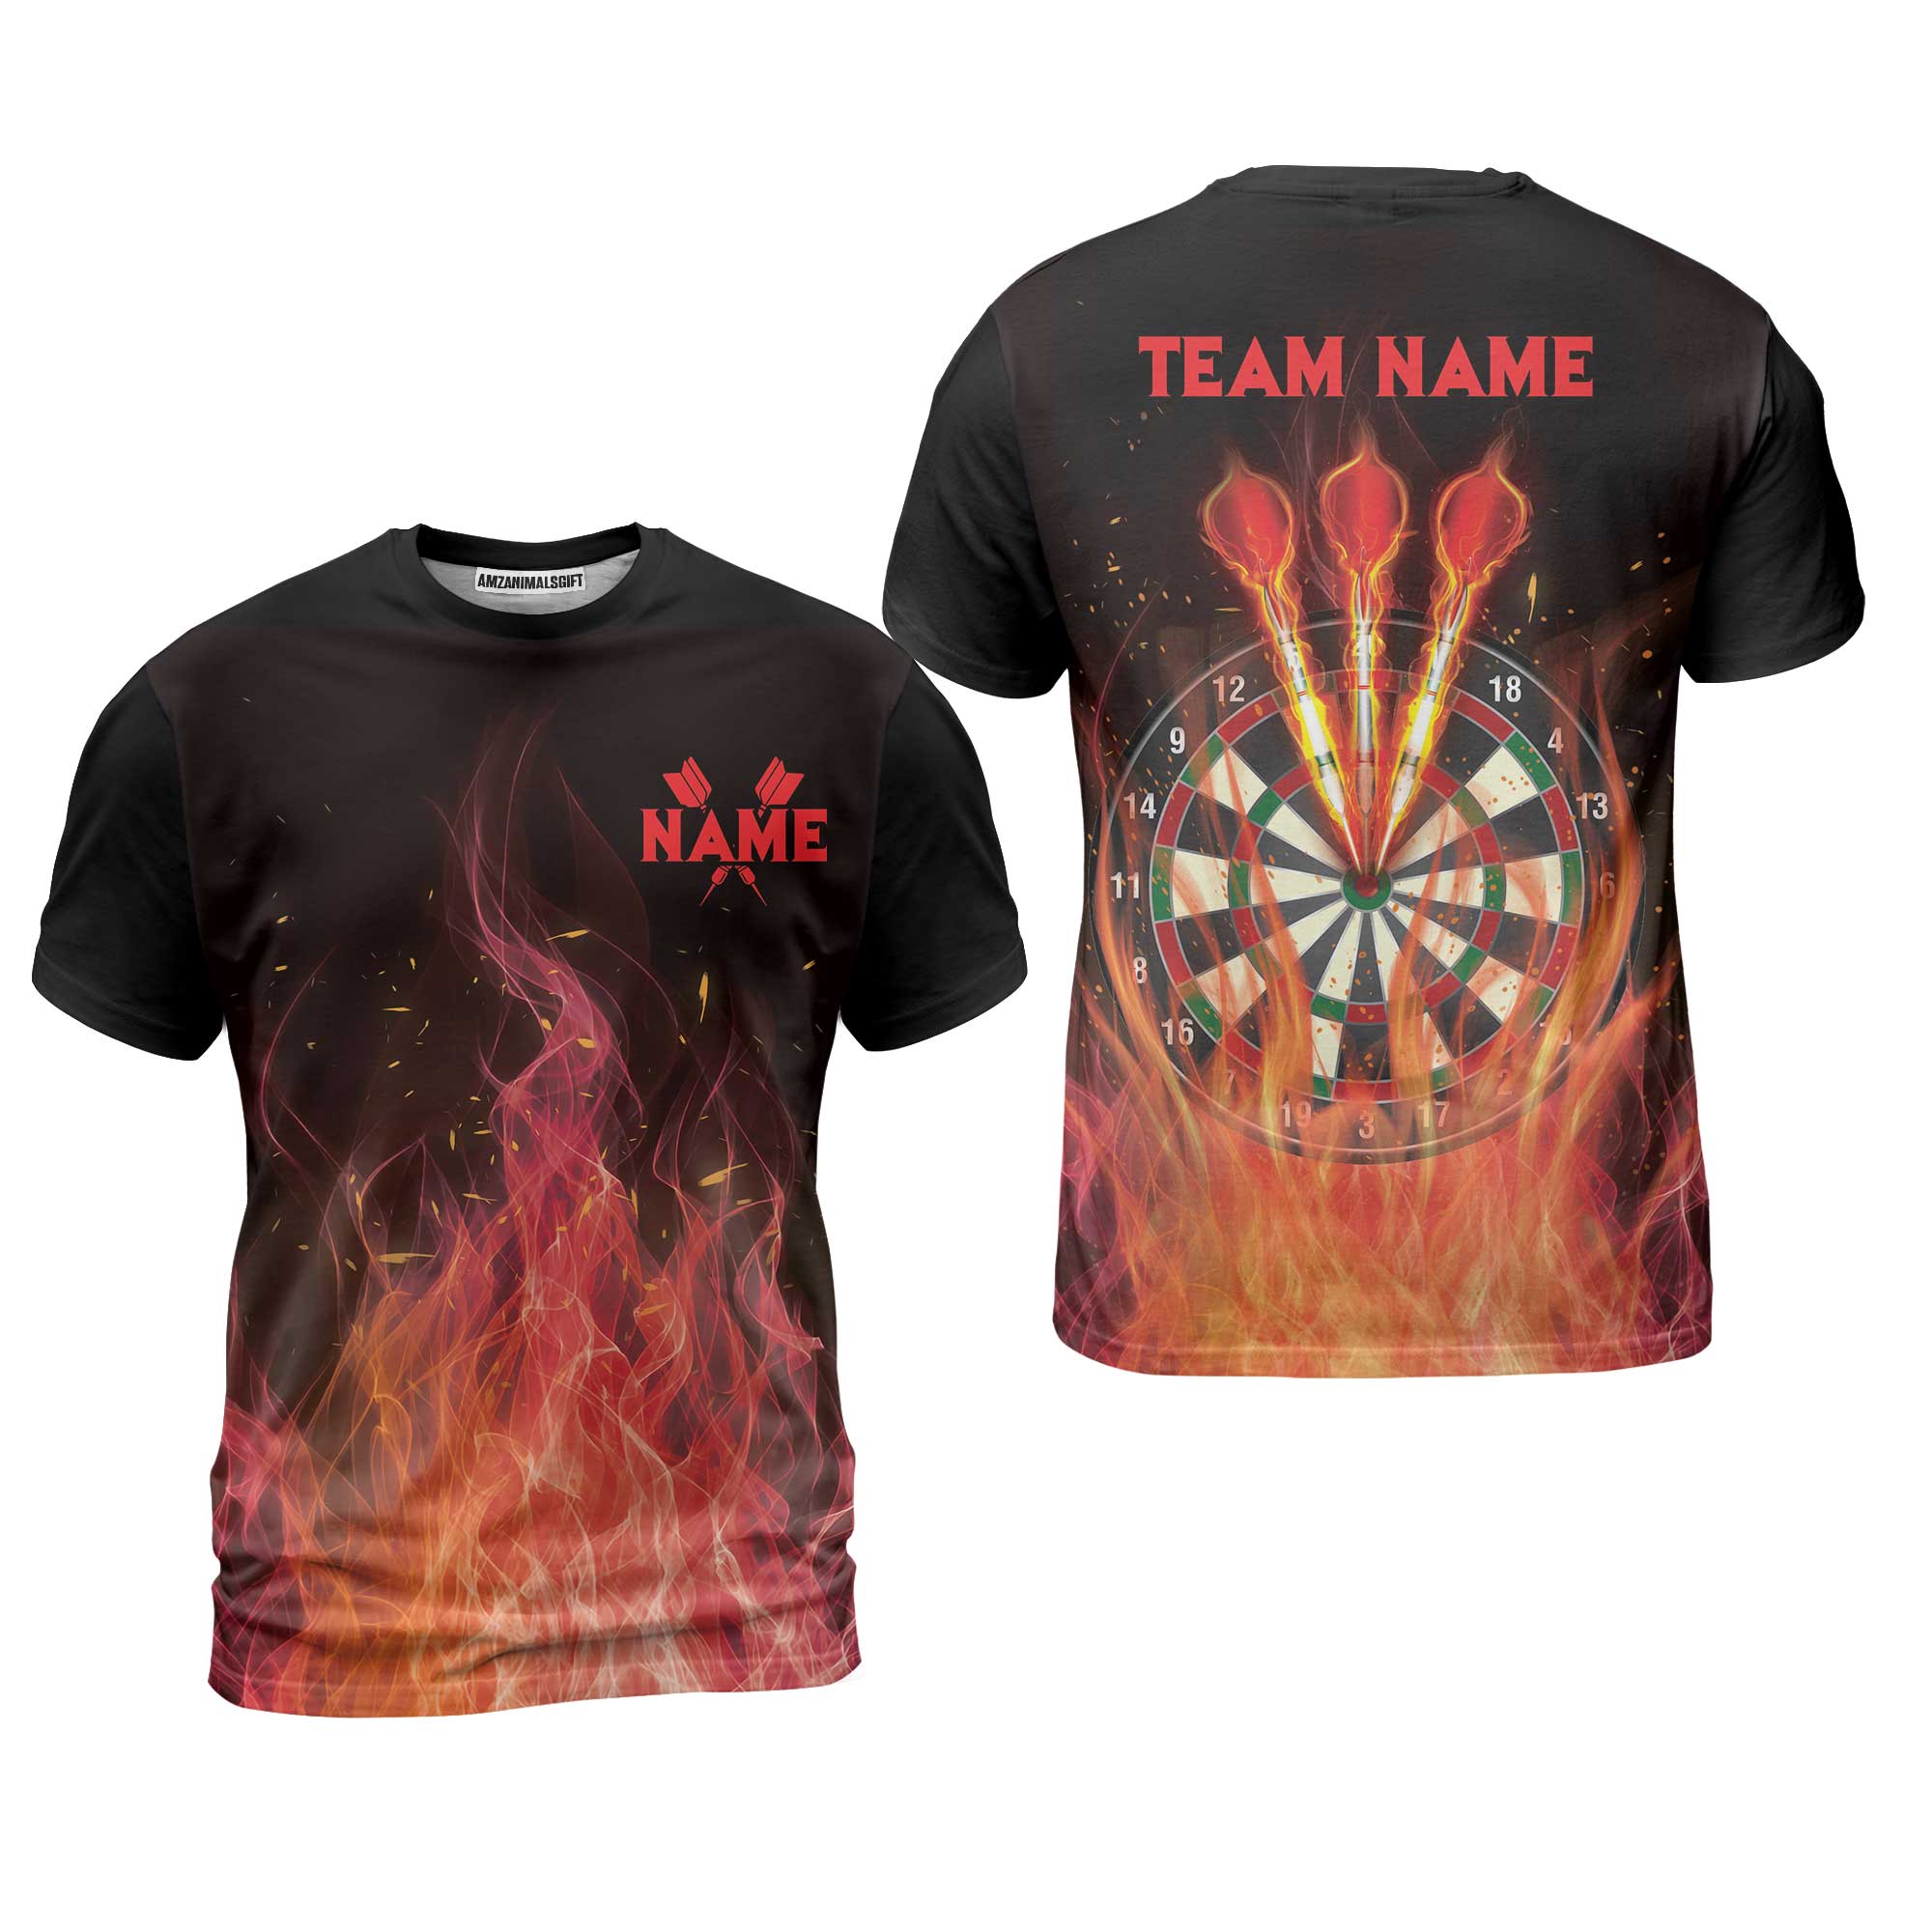 Darts T-Shirt Custom Name And Team Name, Darts Flame Player Uniform, Personalized Shirt For Darts Lovers, Darts Players